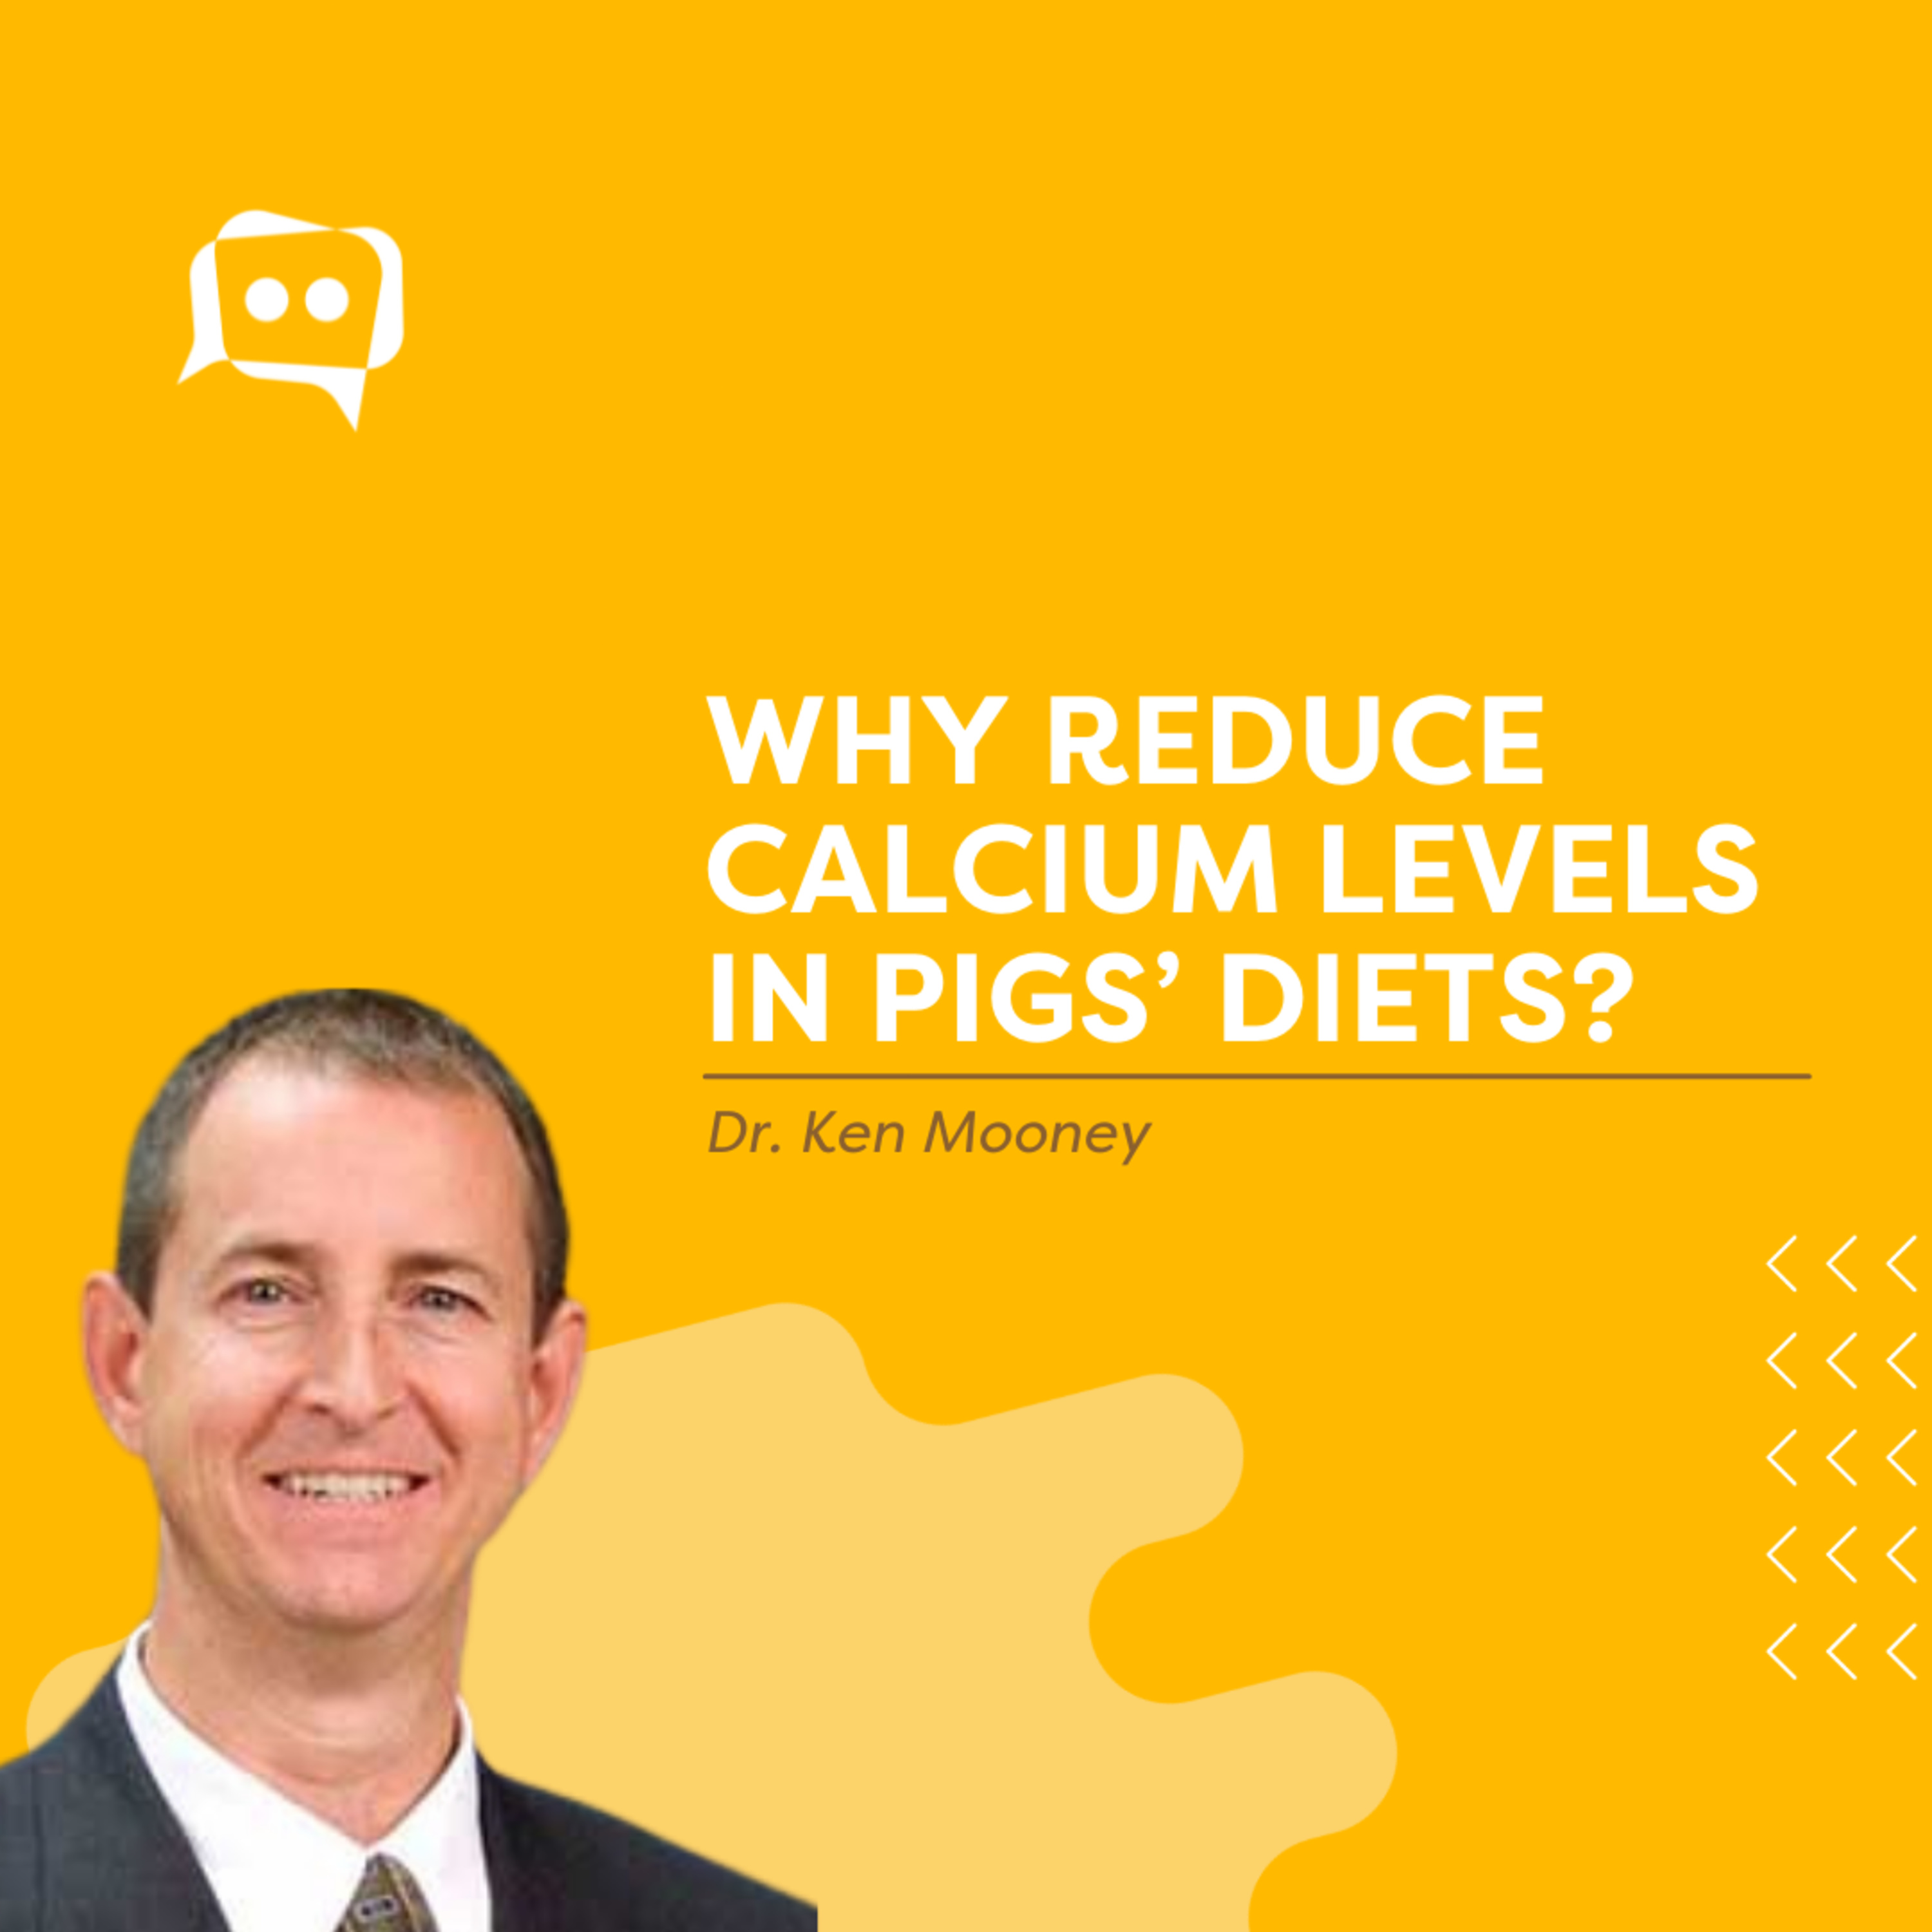 #SHORTS: Why reduce calcium levels in pigs’ diets? With Dr. Ken Mooney